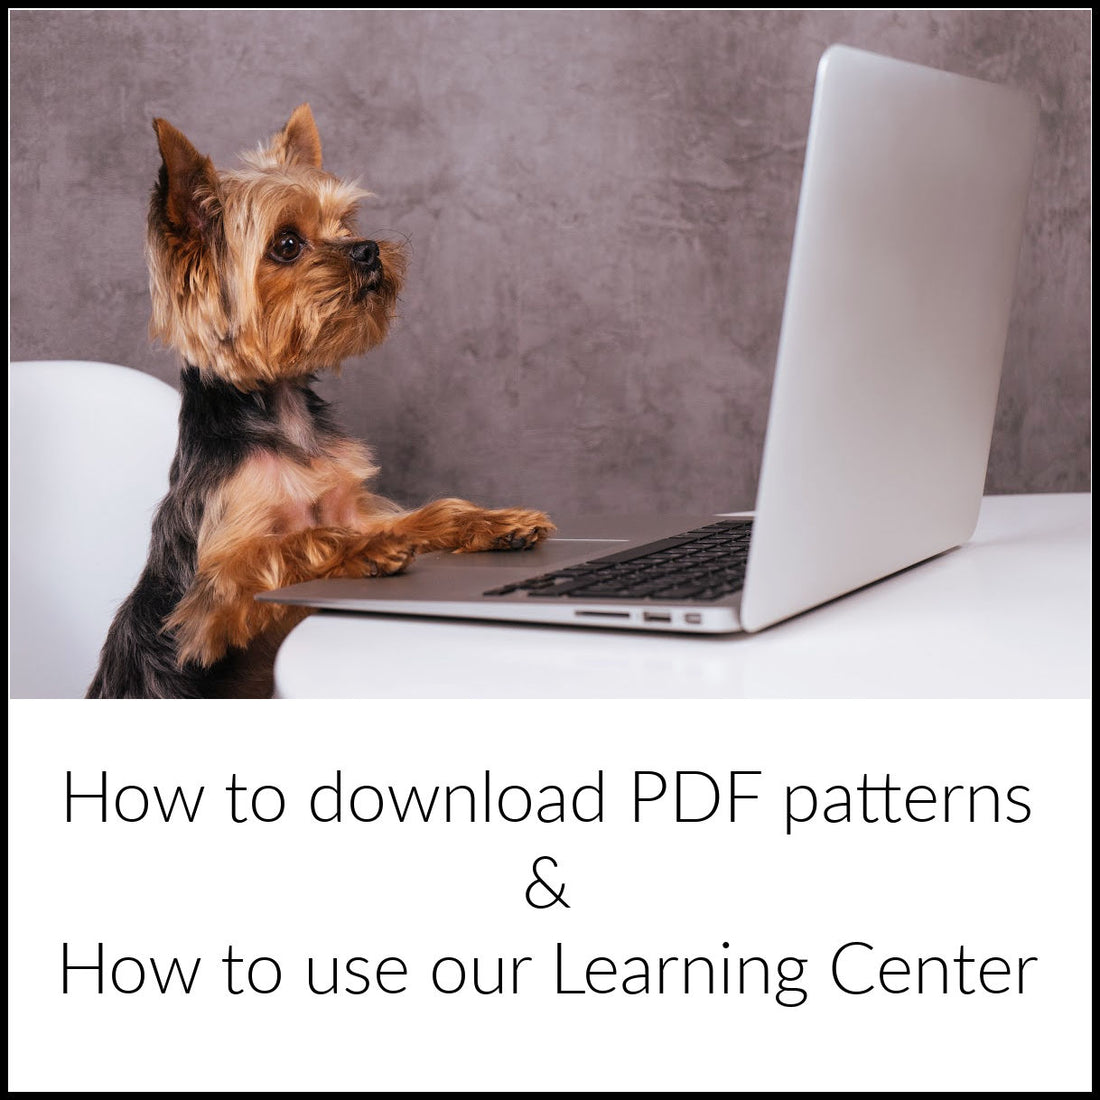 How to download PDF patterns & How to use the Learning Center